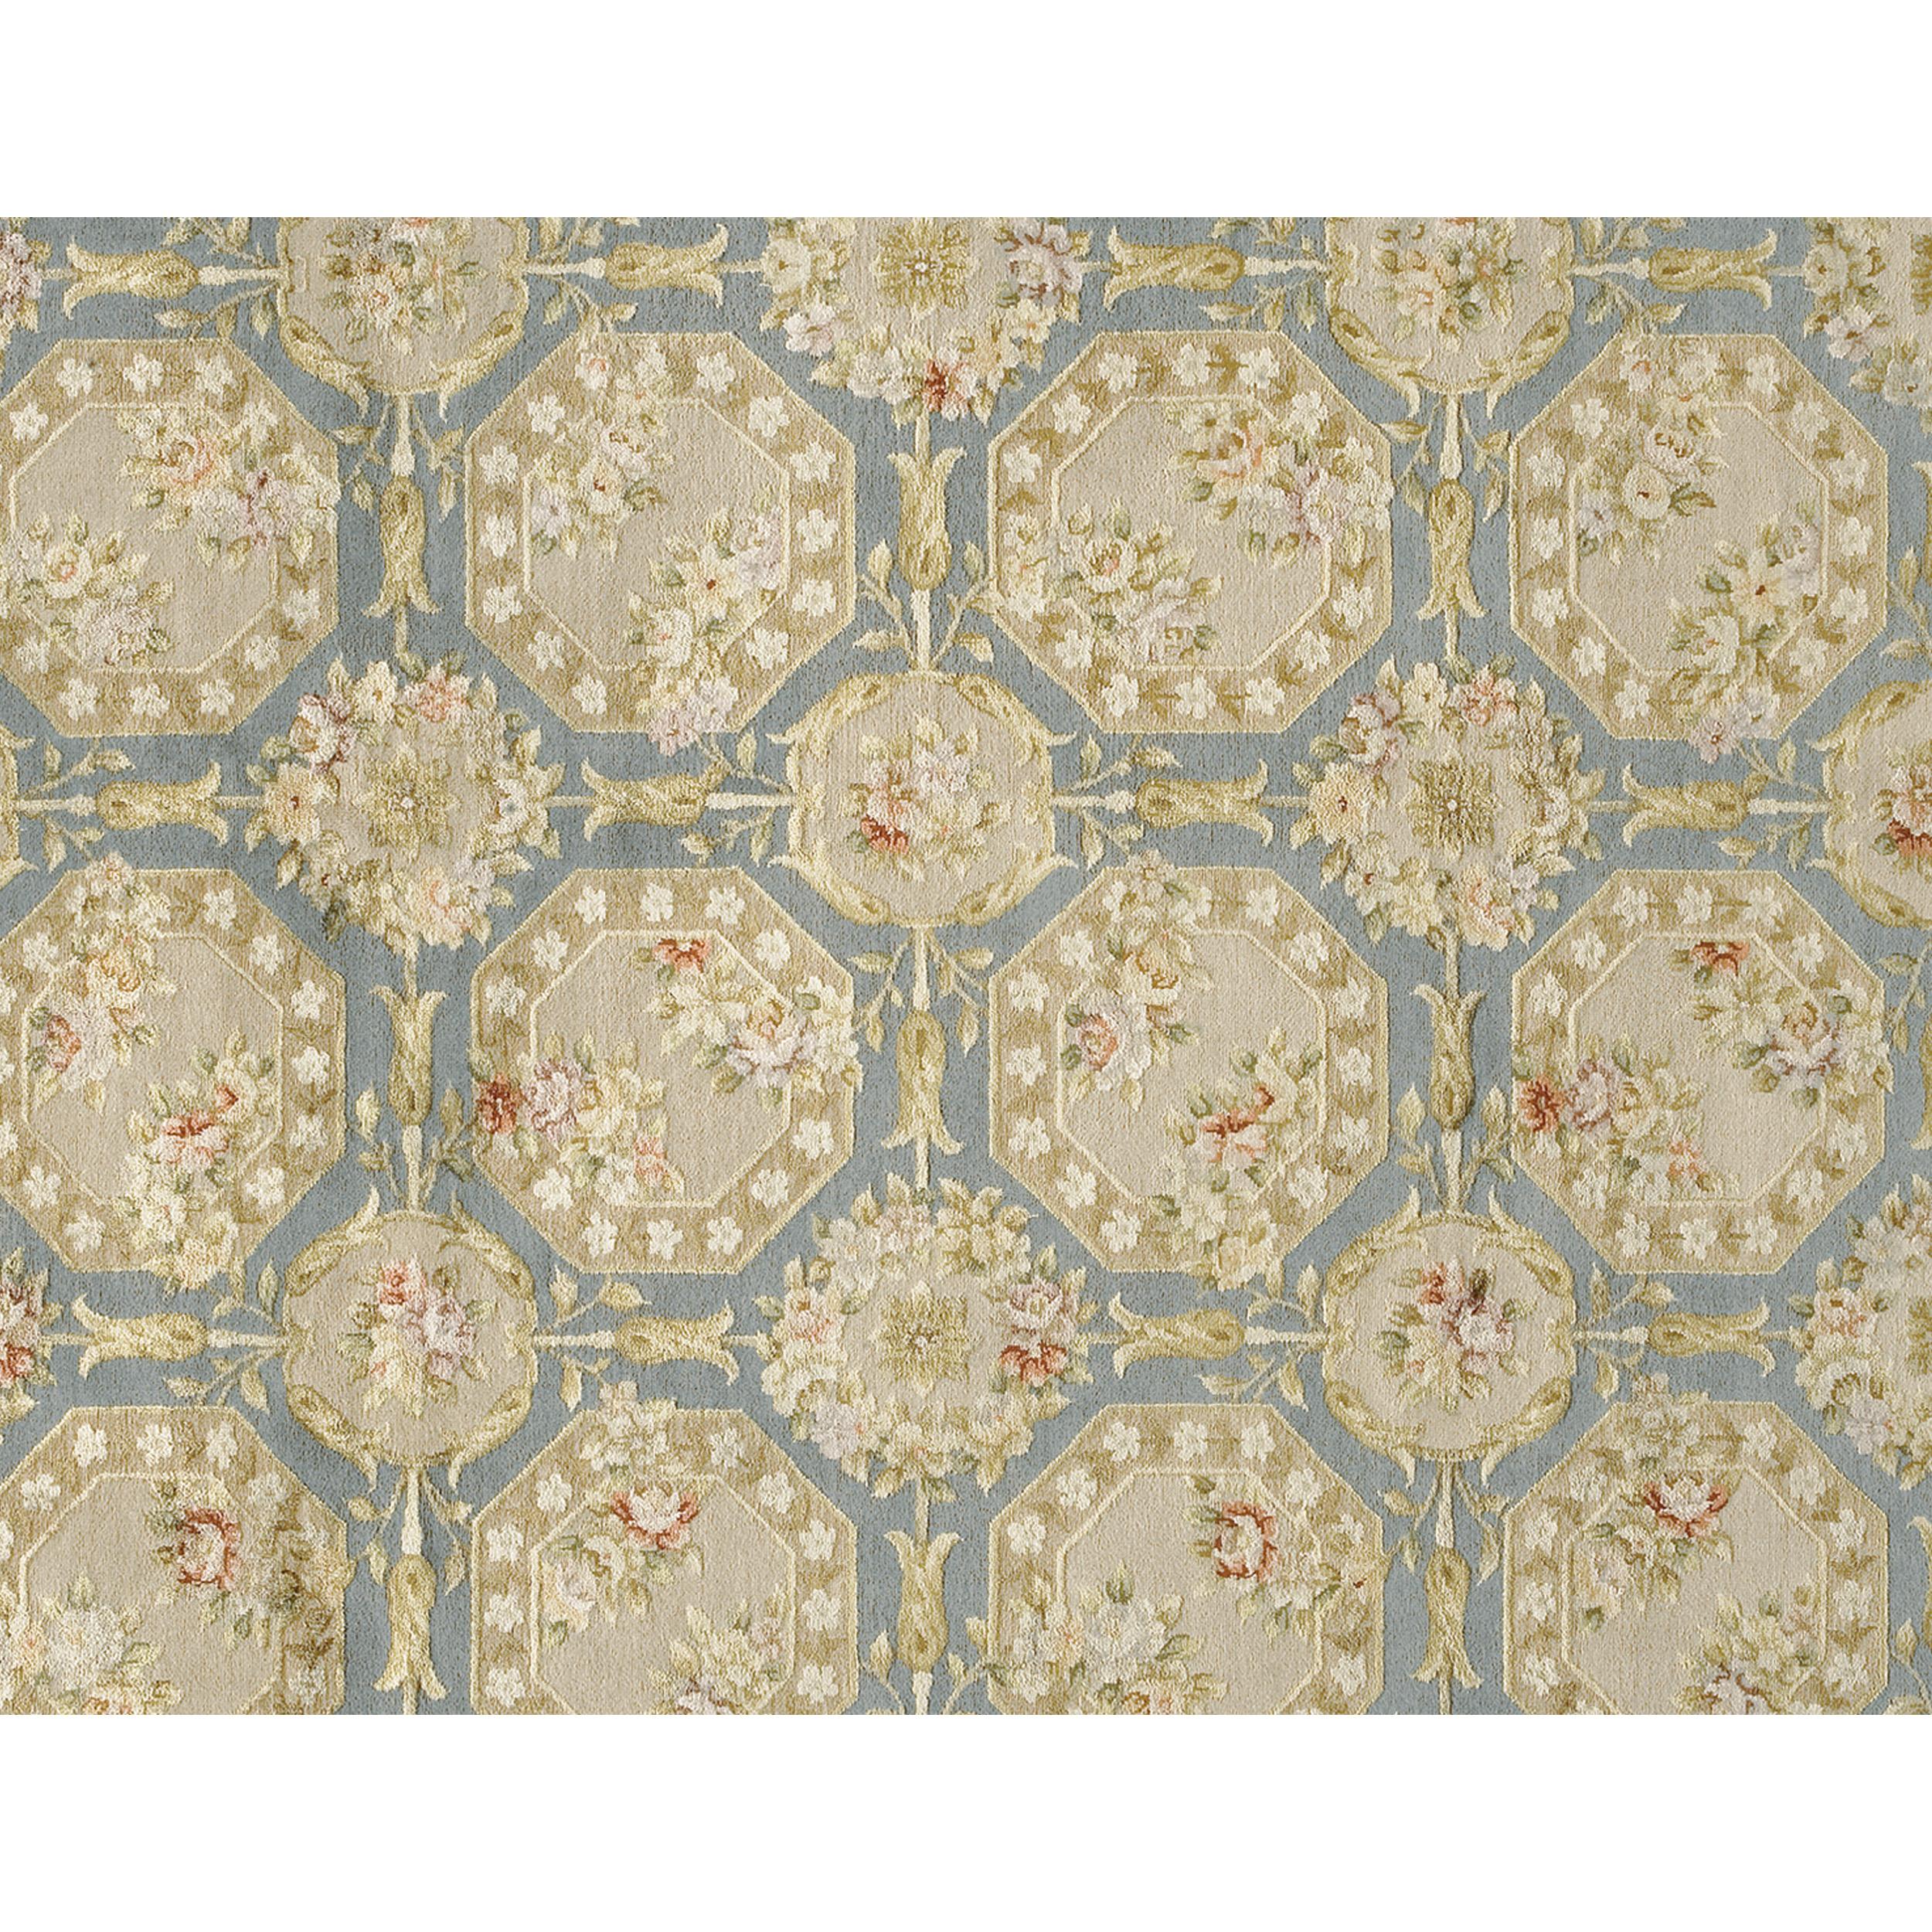 Aubusson Luxury European Hand-Knotted Fairfax Sterling & Cream 12x18 Rug For Sale